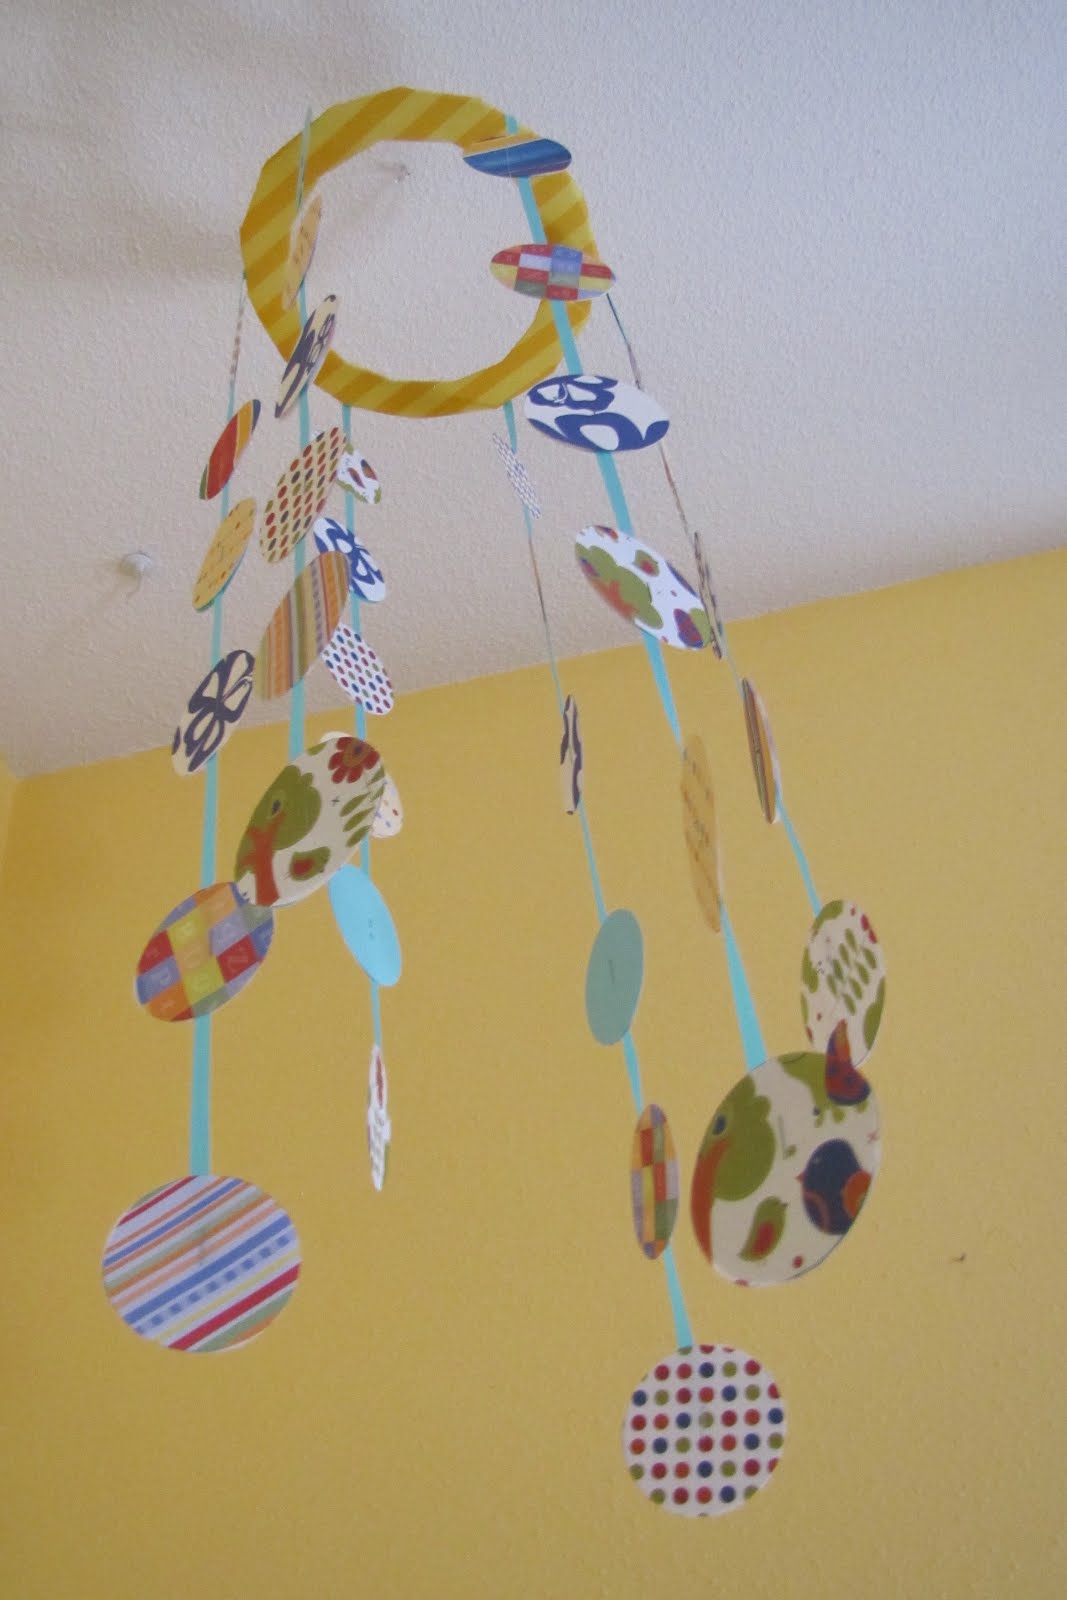 Our Daily Post from the Emerald Coast: Joia's DIY Projects